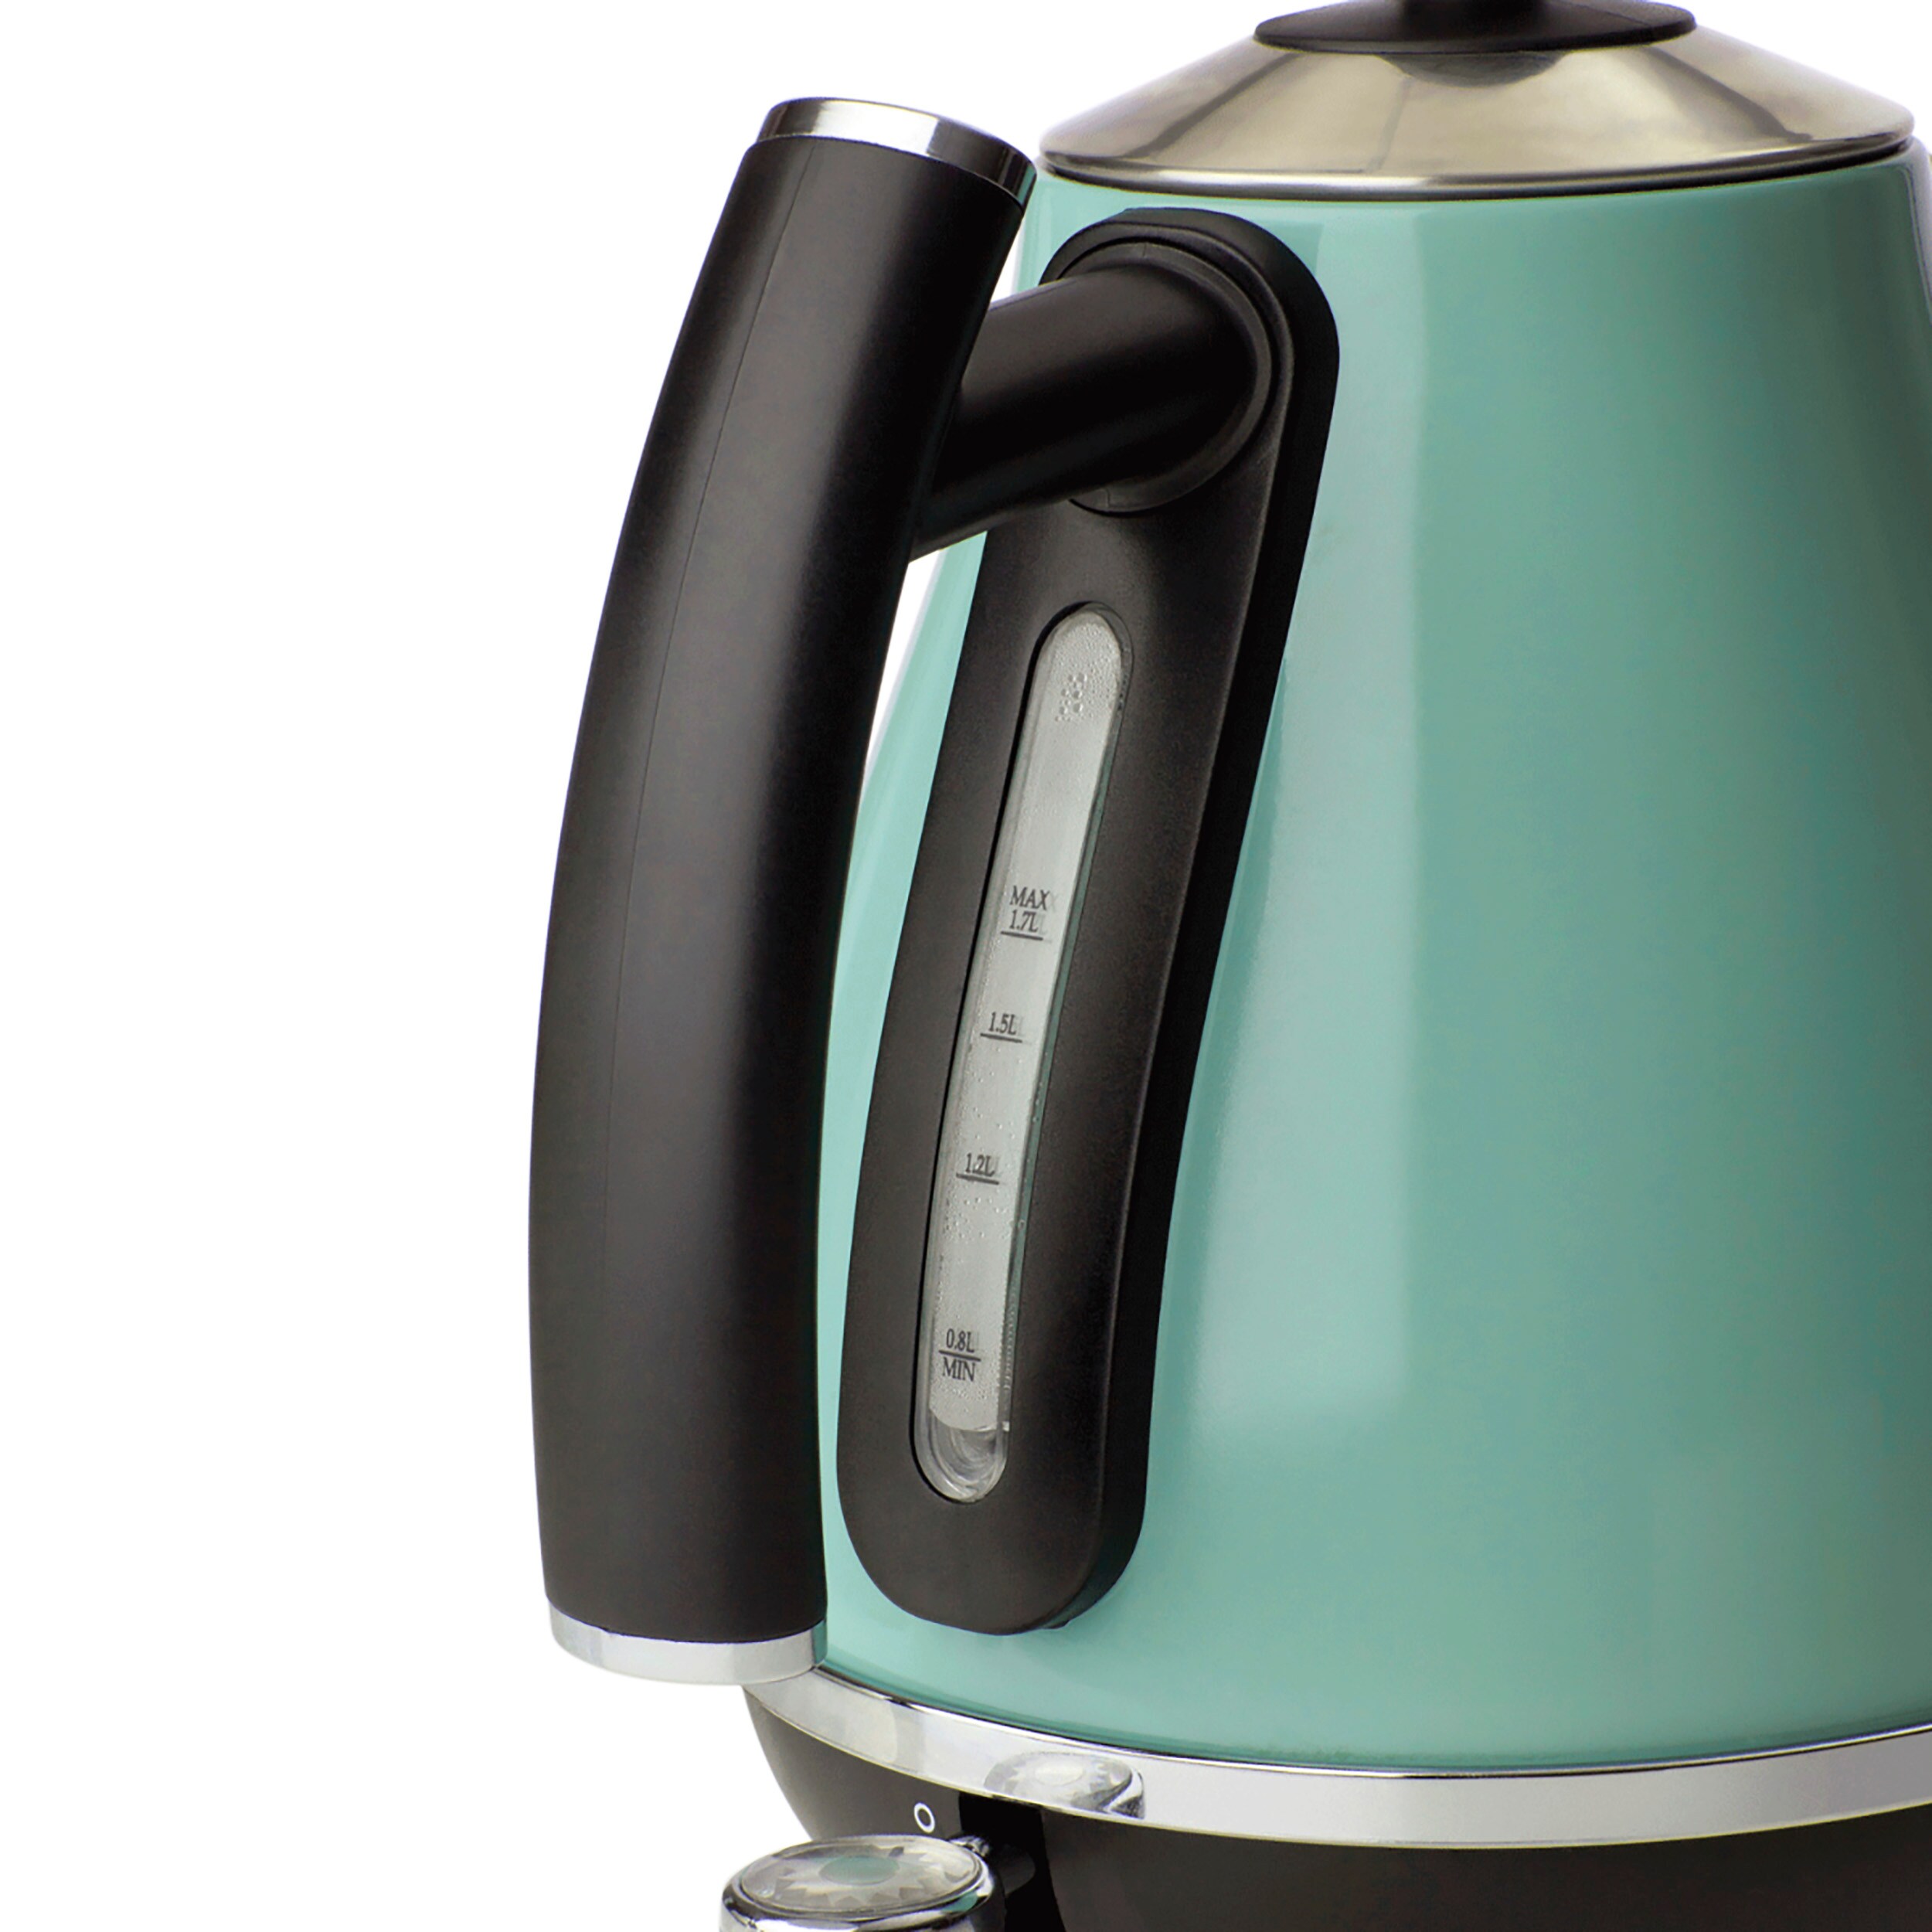 Used Details about   Haden Cotswold 1.7 Liter Stainless Steel Body Retro Electric Kettle